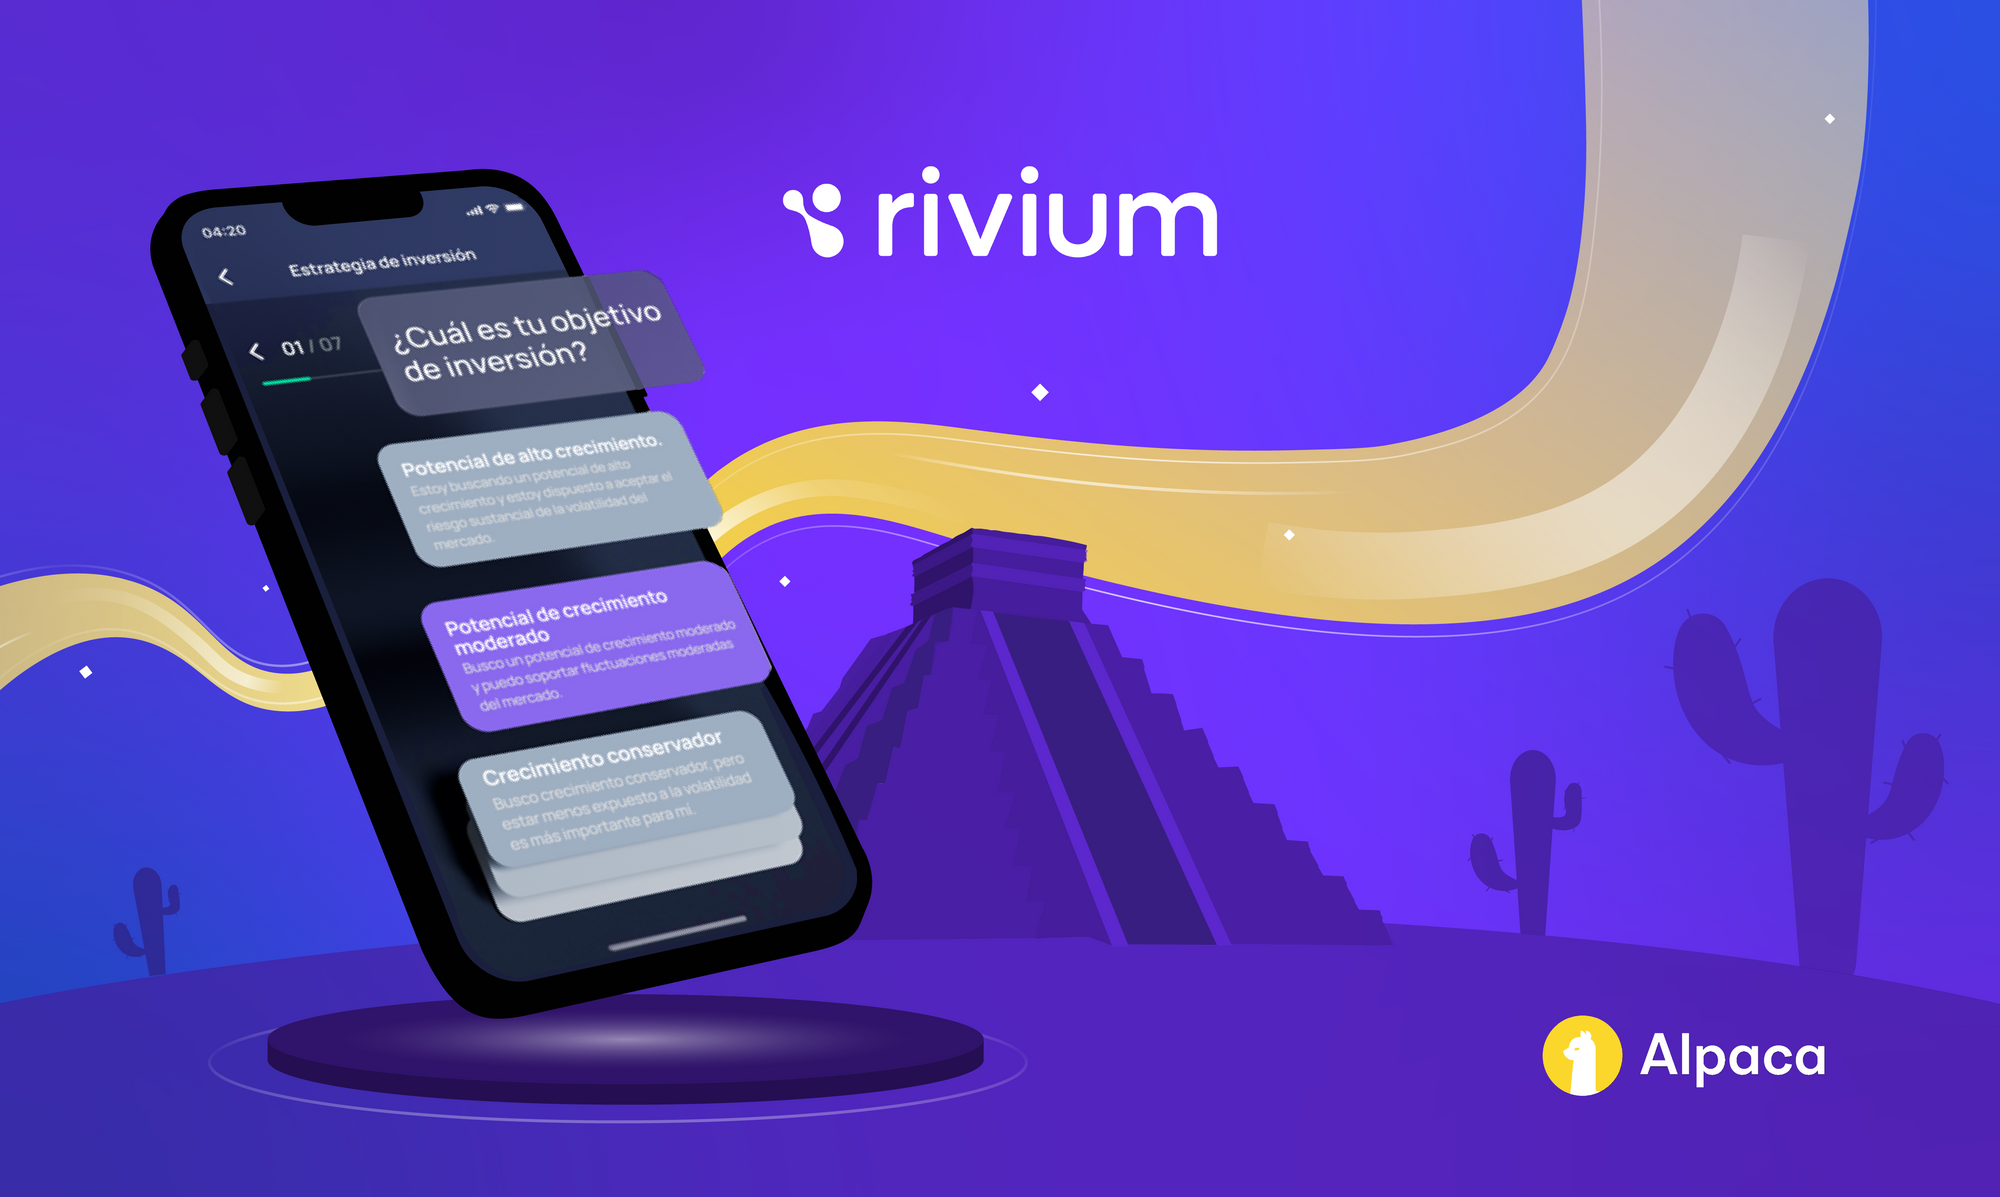 Sylon Launches Rivium with Alpaca to Make Investing More Accessible for Mexican Investors